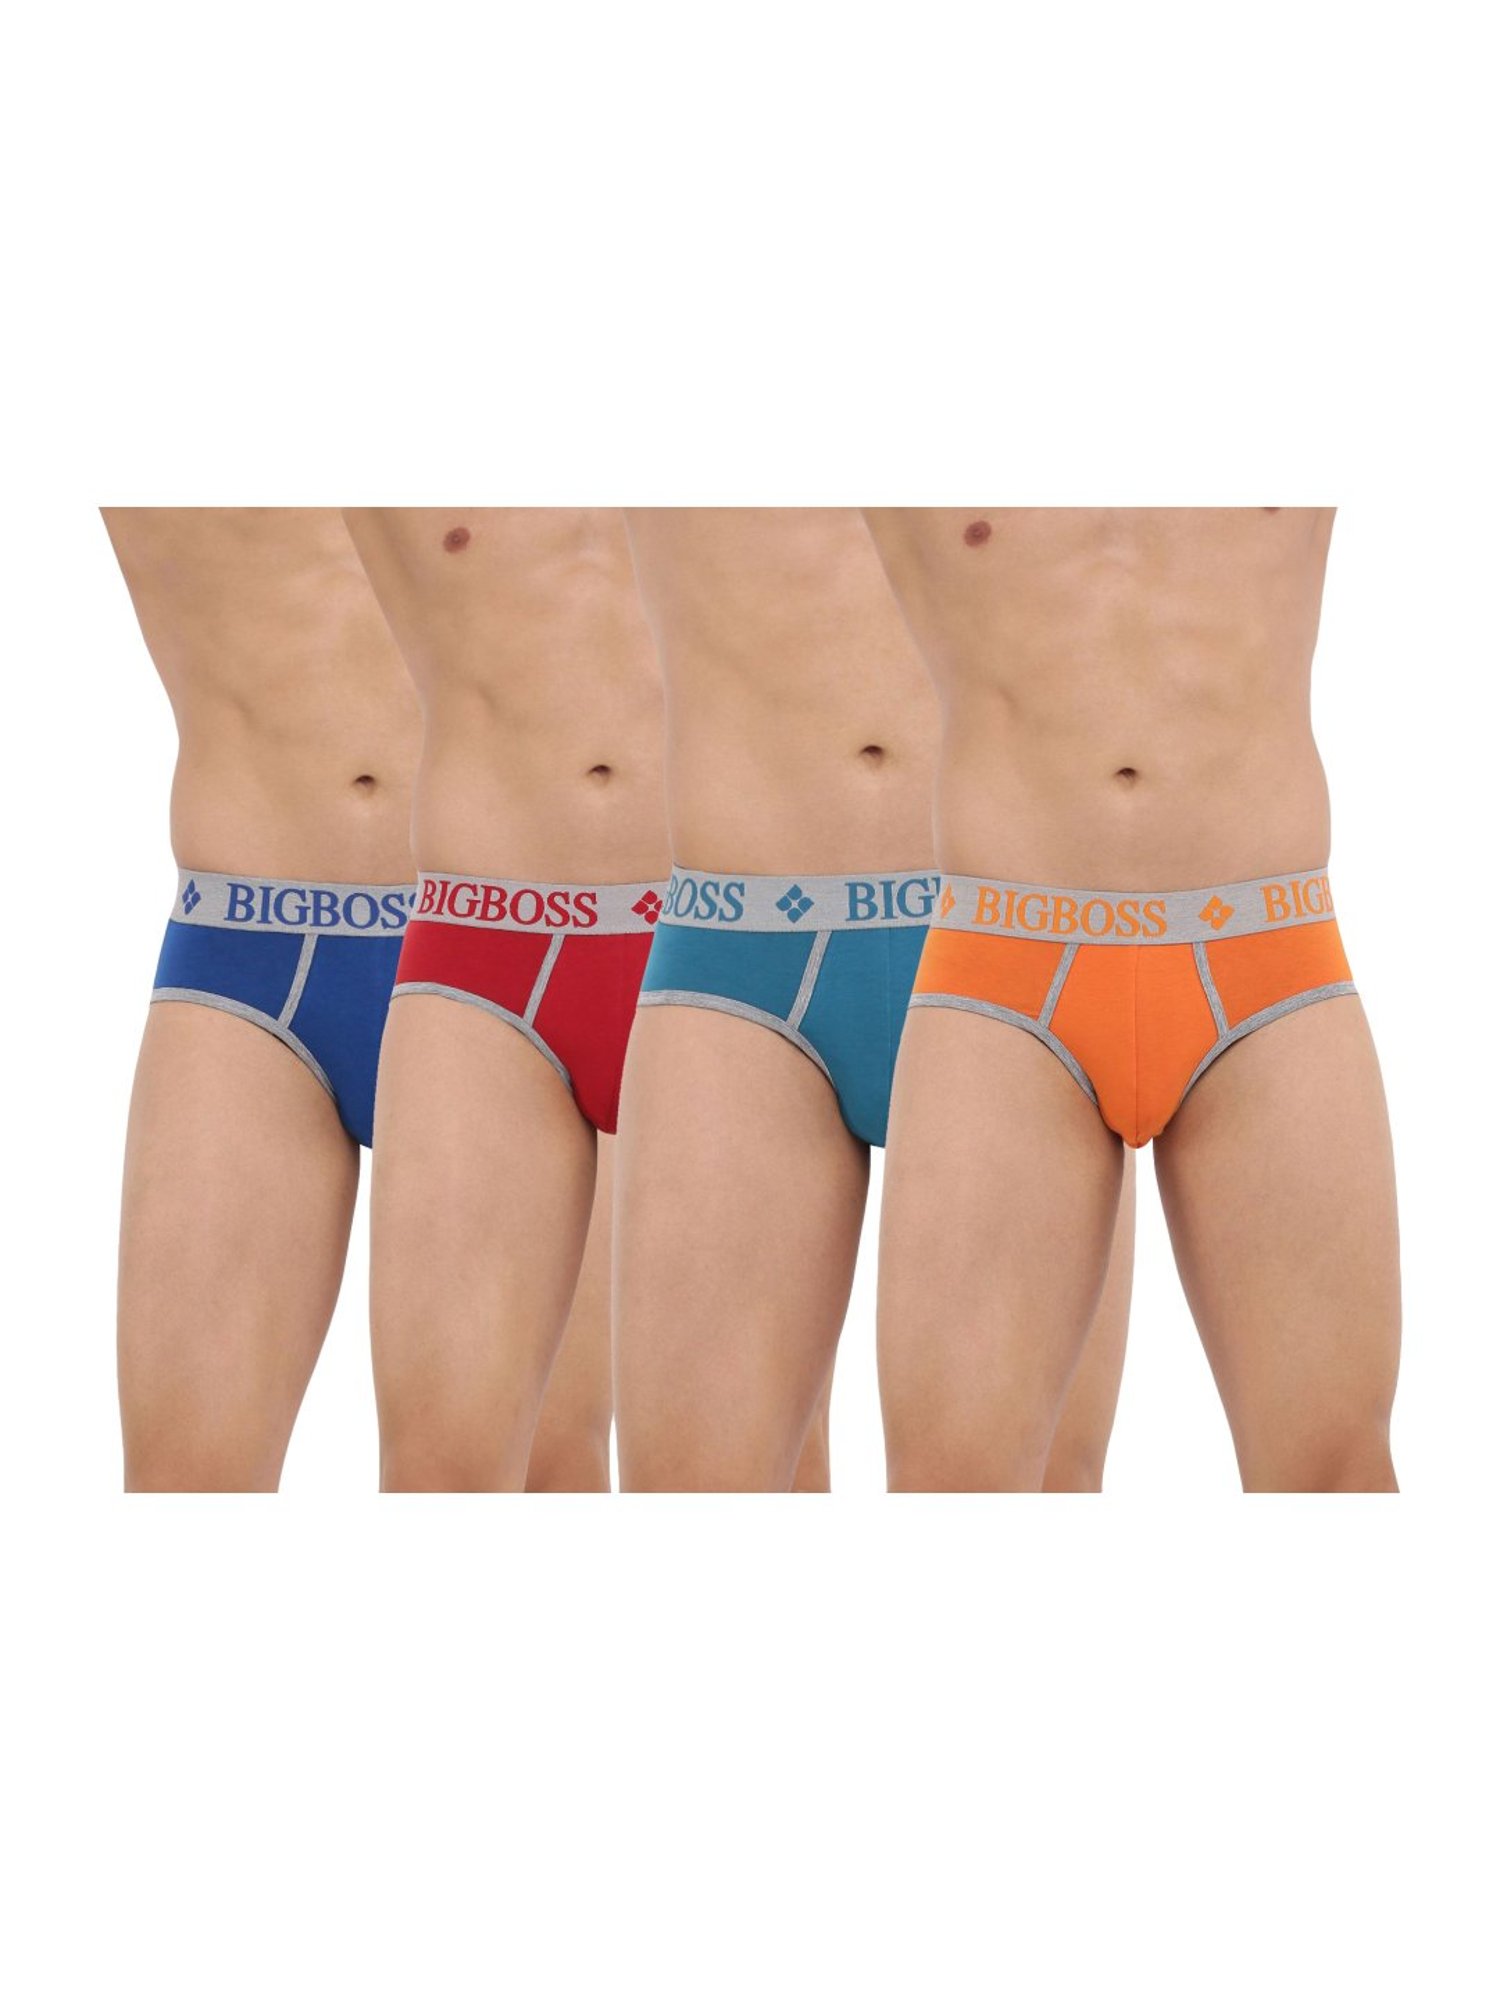 Buy Dollar Bigboss Assorted Color Cotton Briefs (Pack Of 4) for